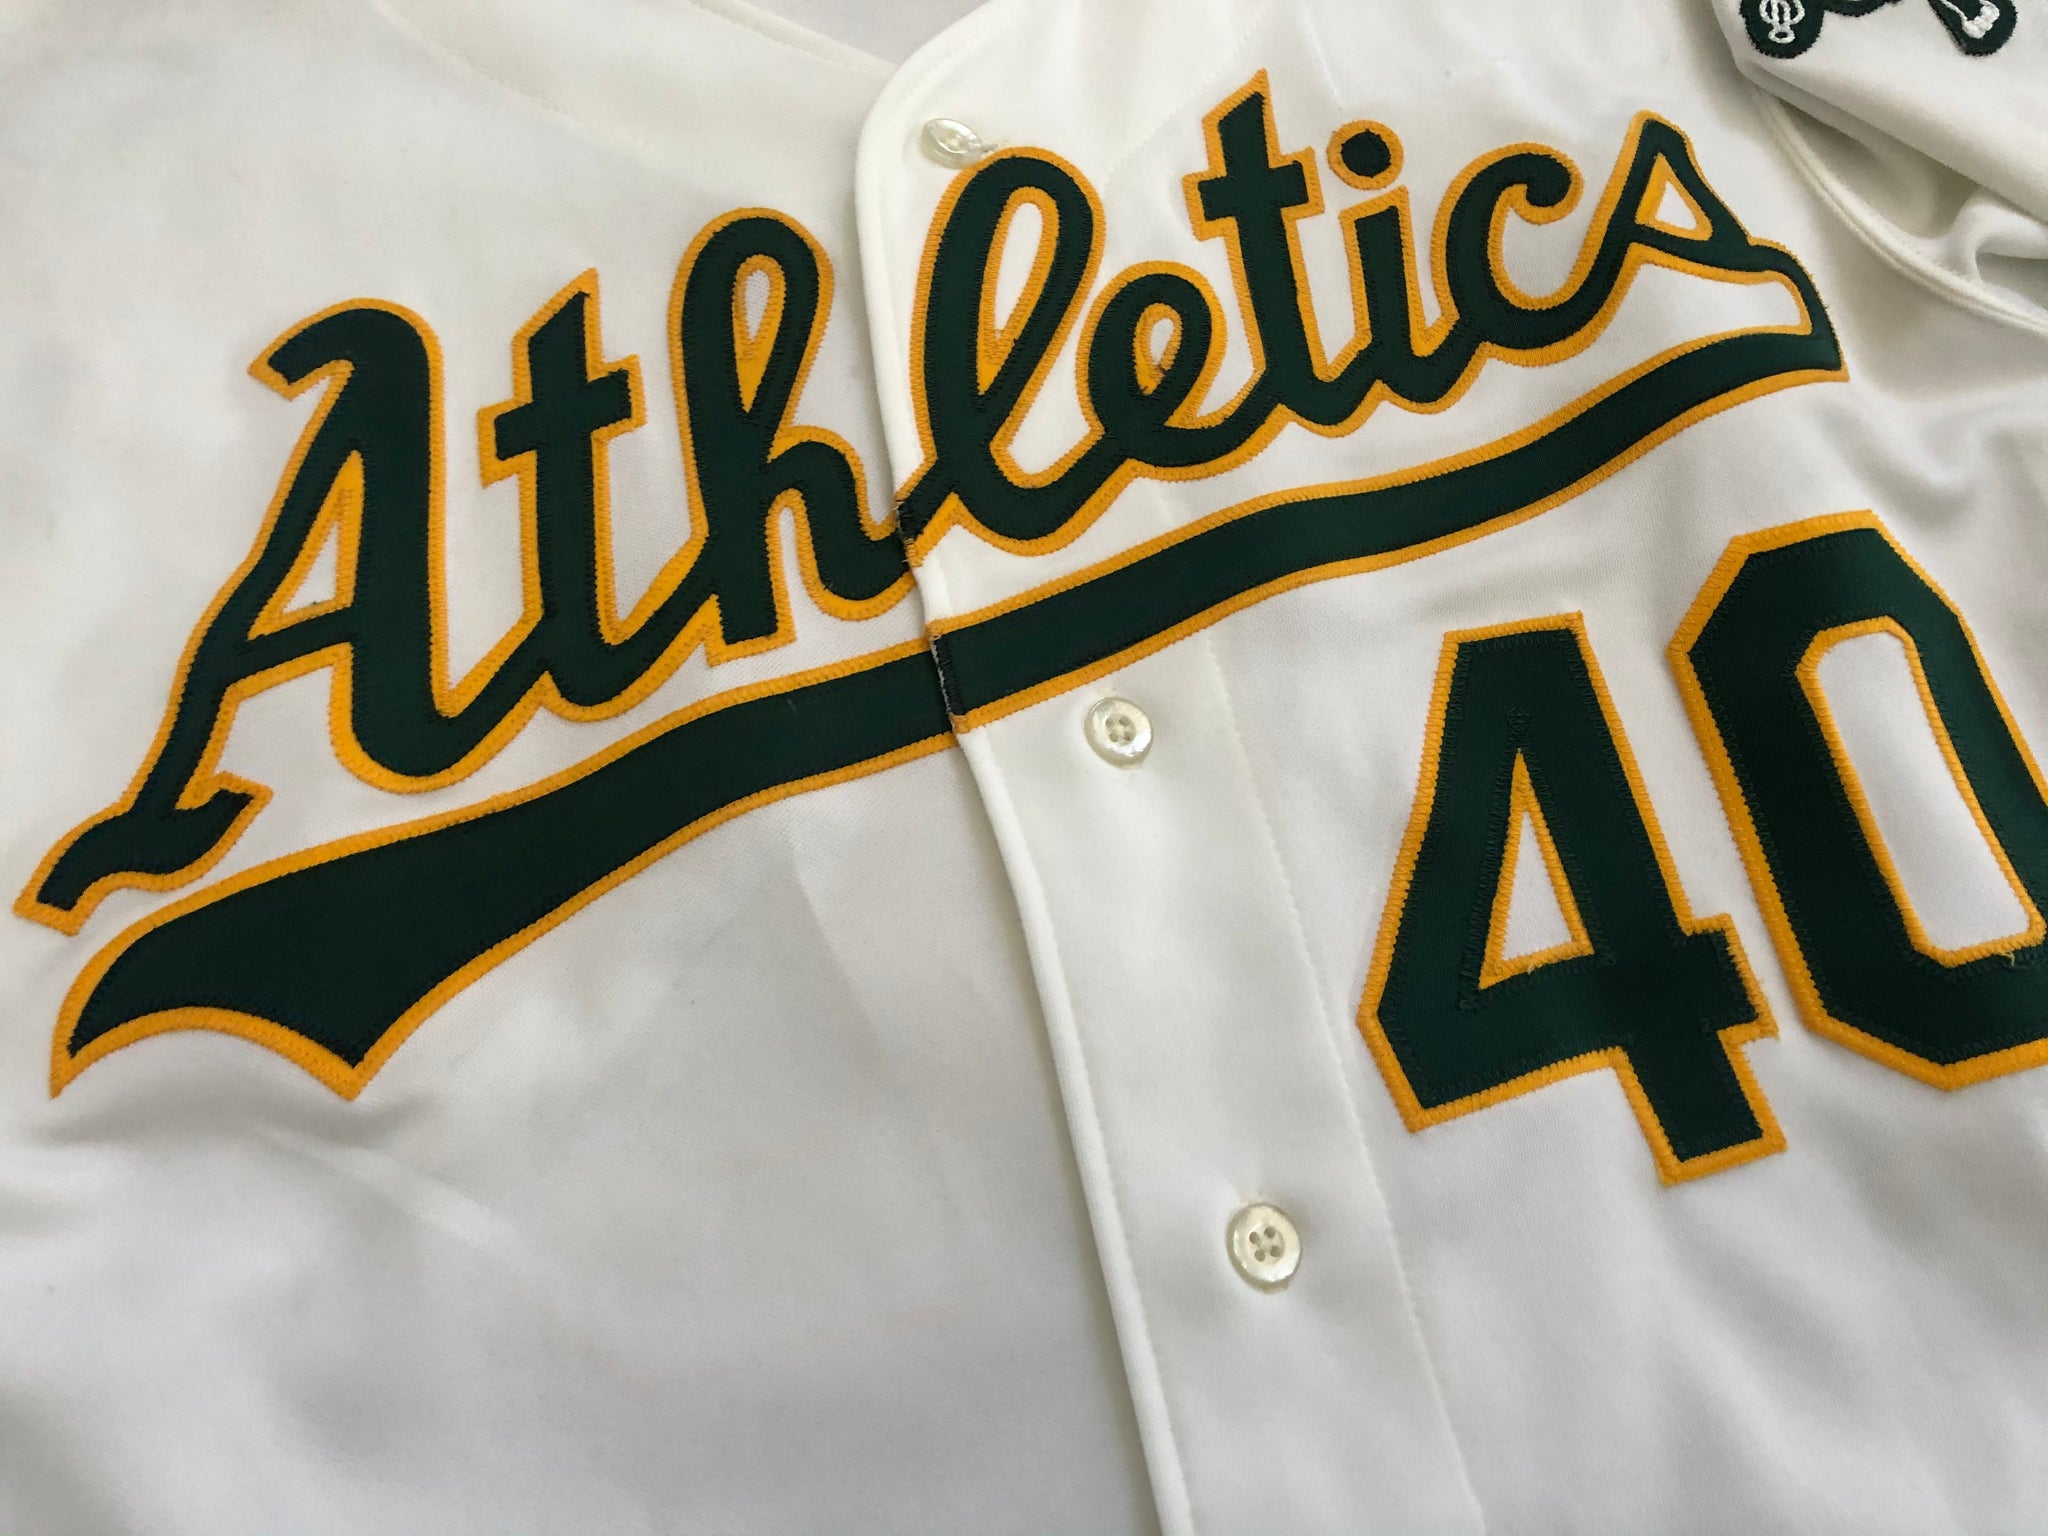 Oakland Athletics A's Jersey By Majestic Size 48 Authentic collection